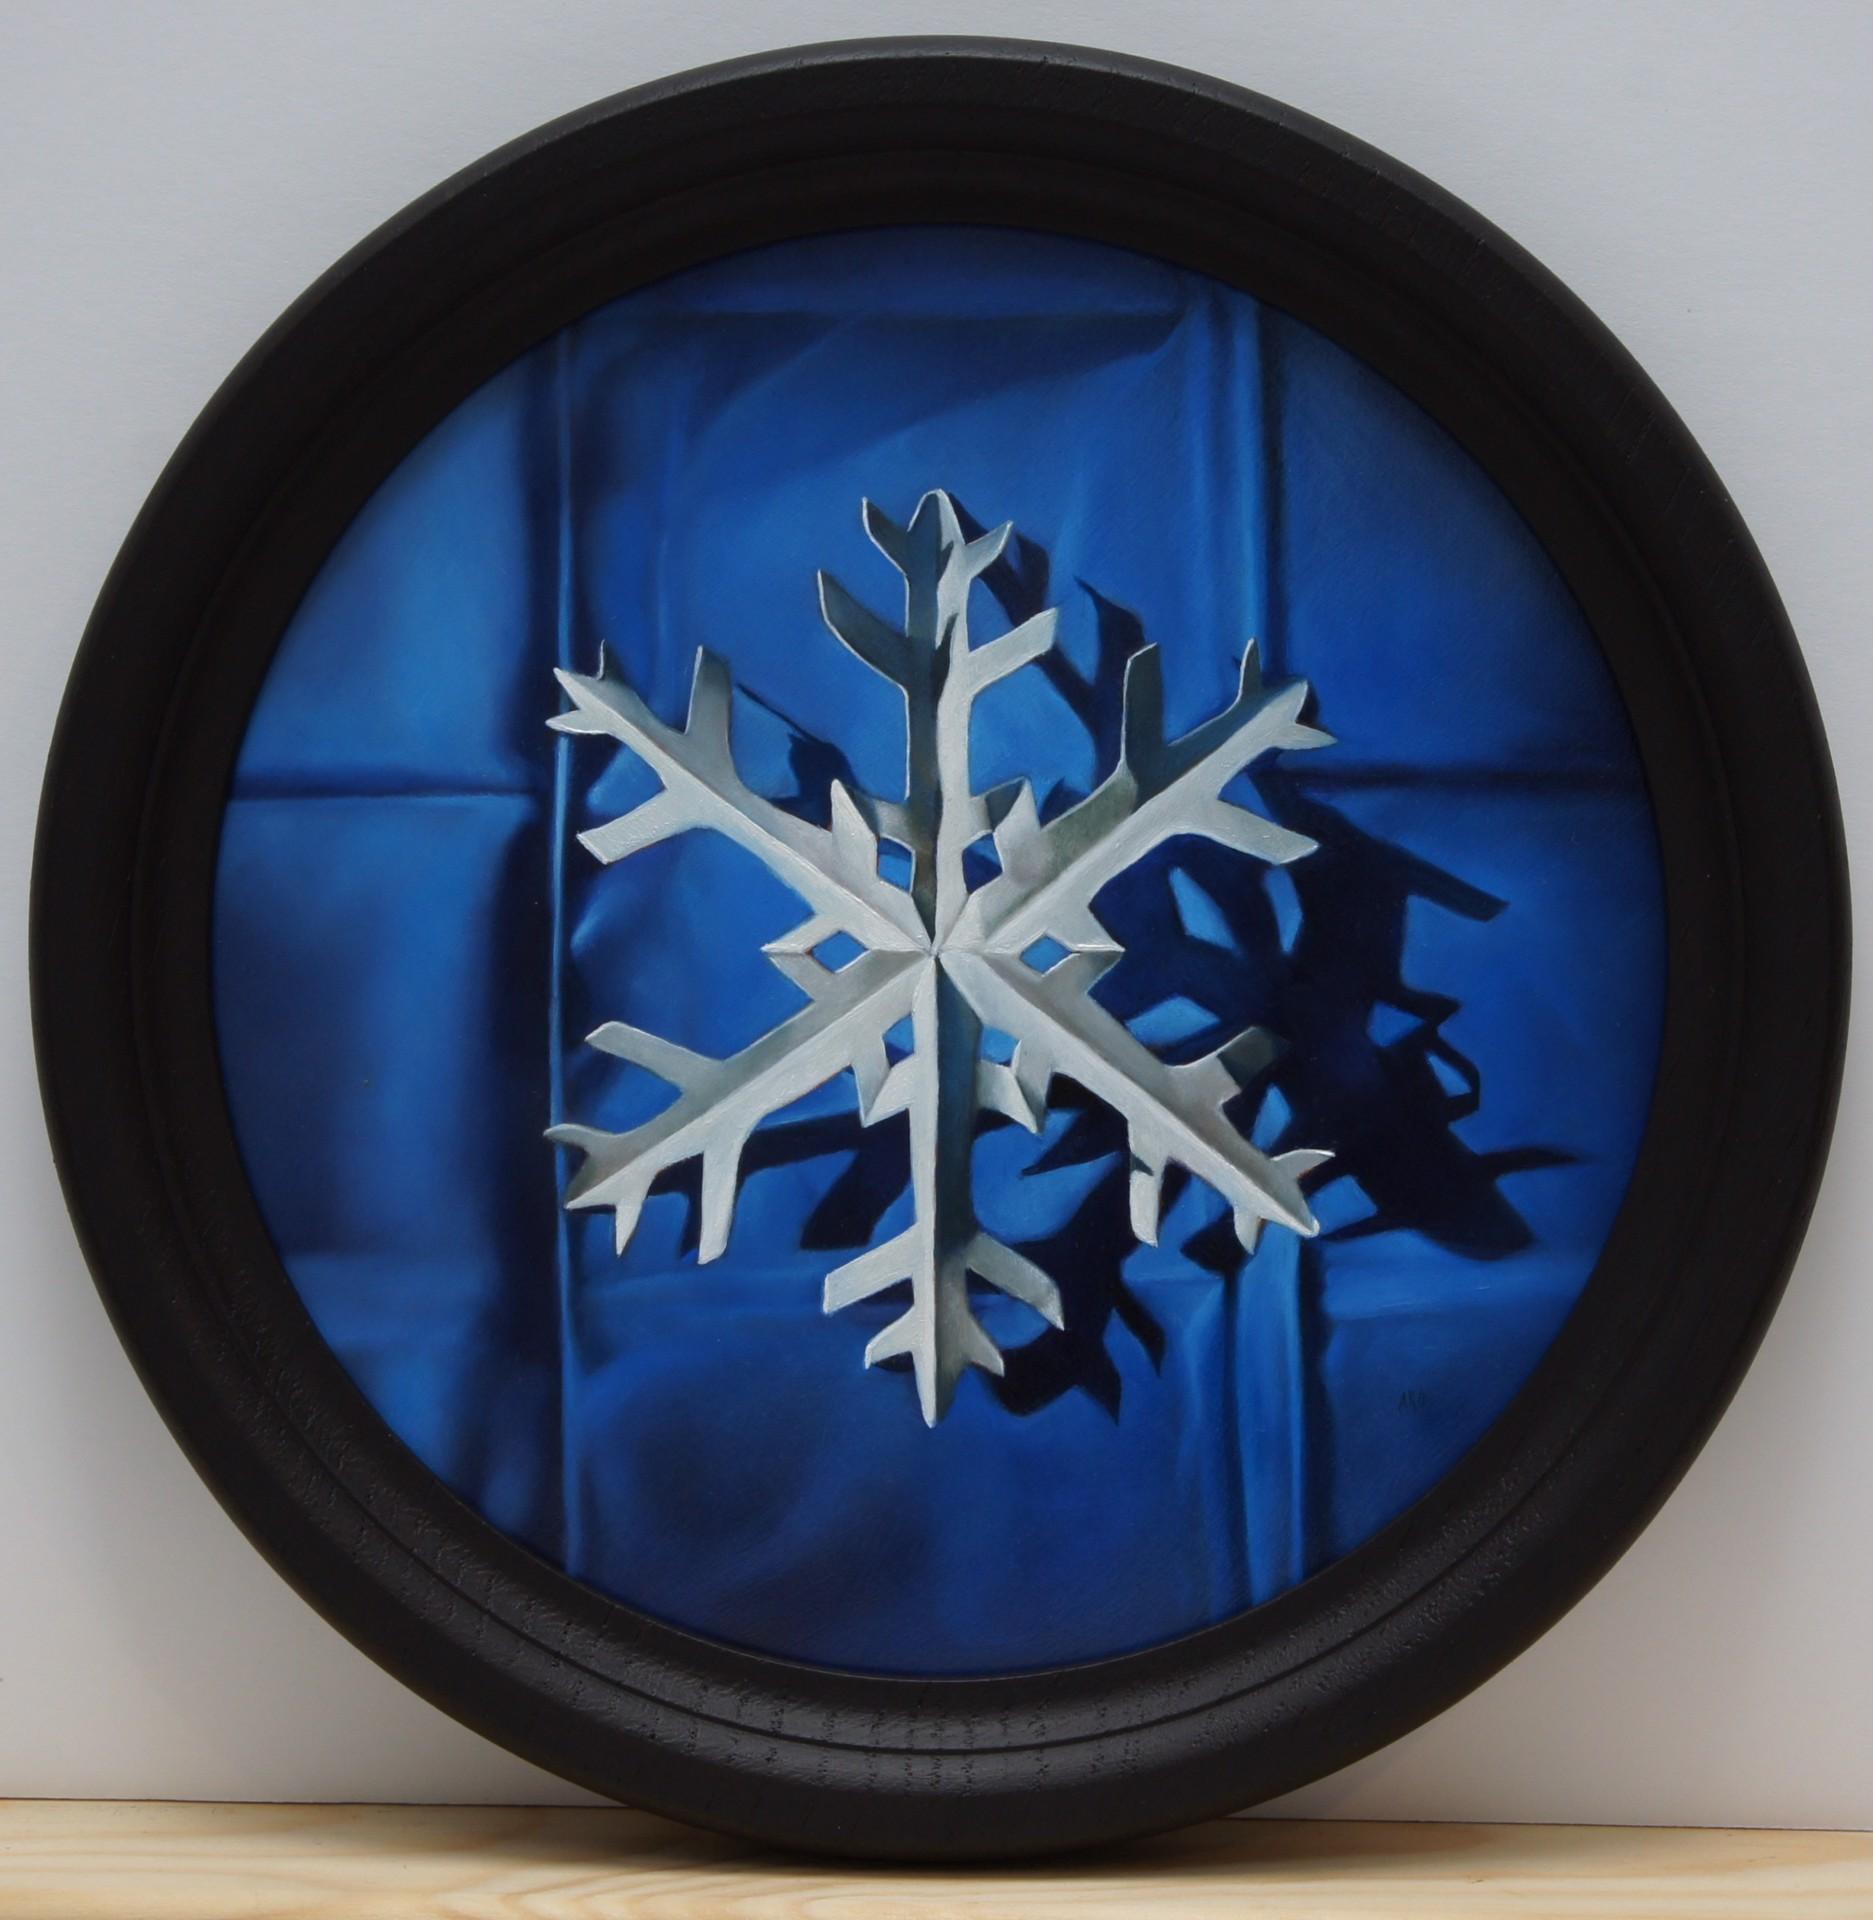 Paper Snowflake 3 - Painting by Amy Ordoveza